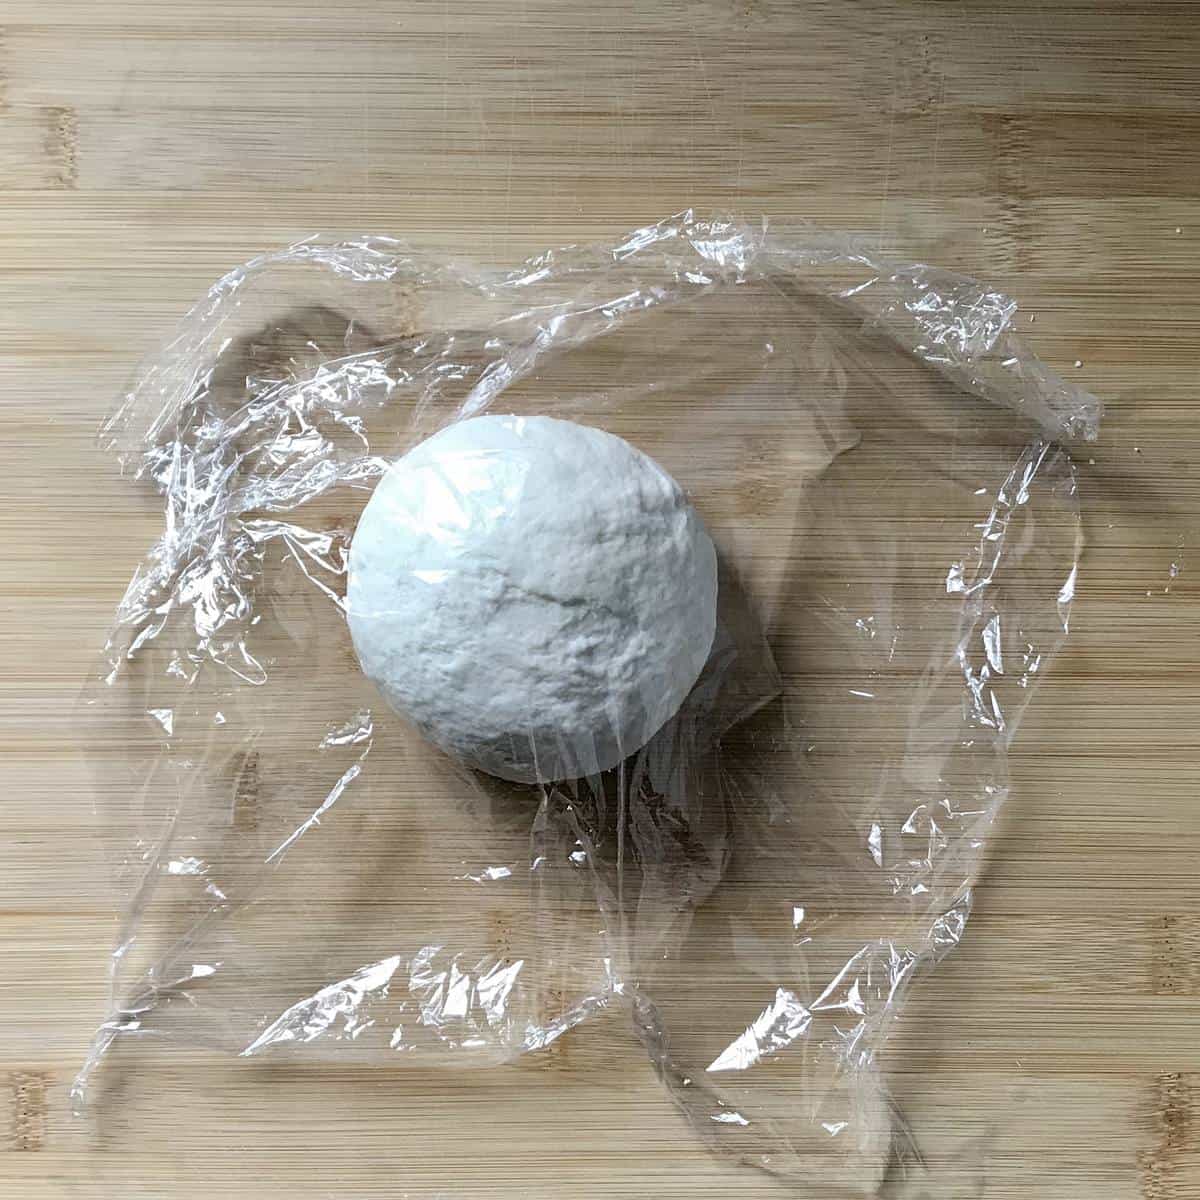 Plastic film is used to cover the ball of dough.